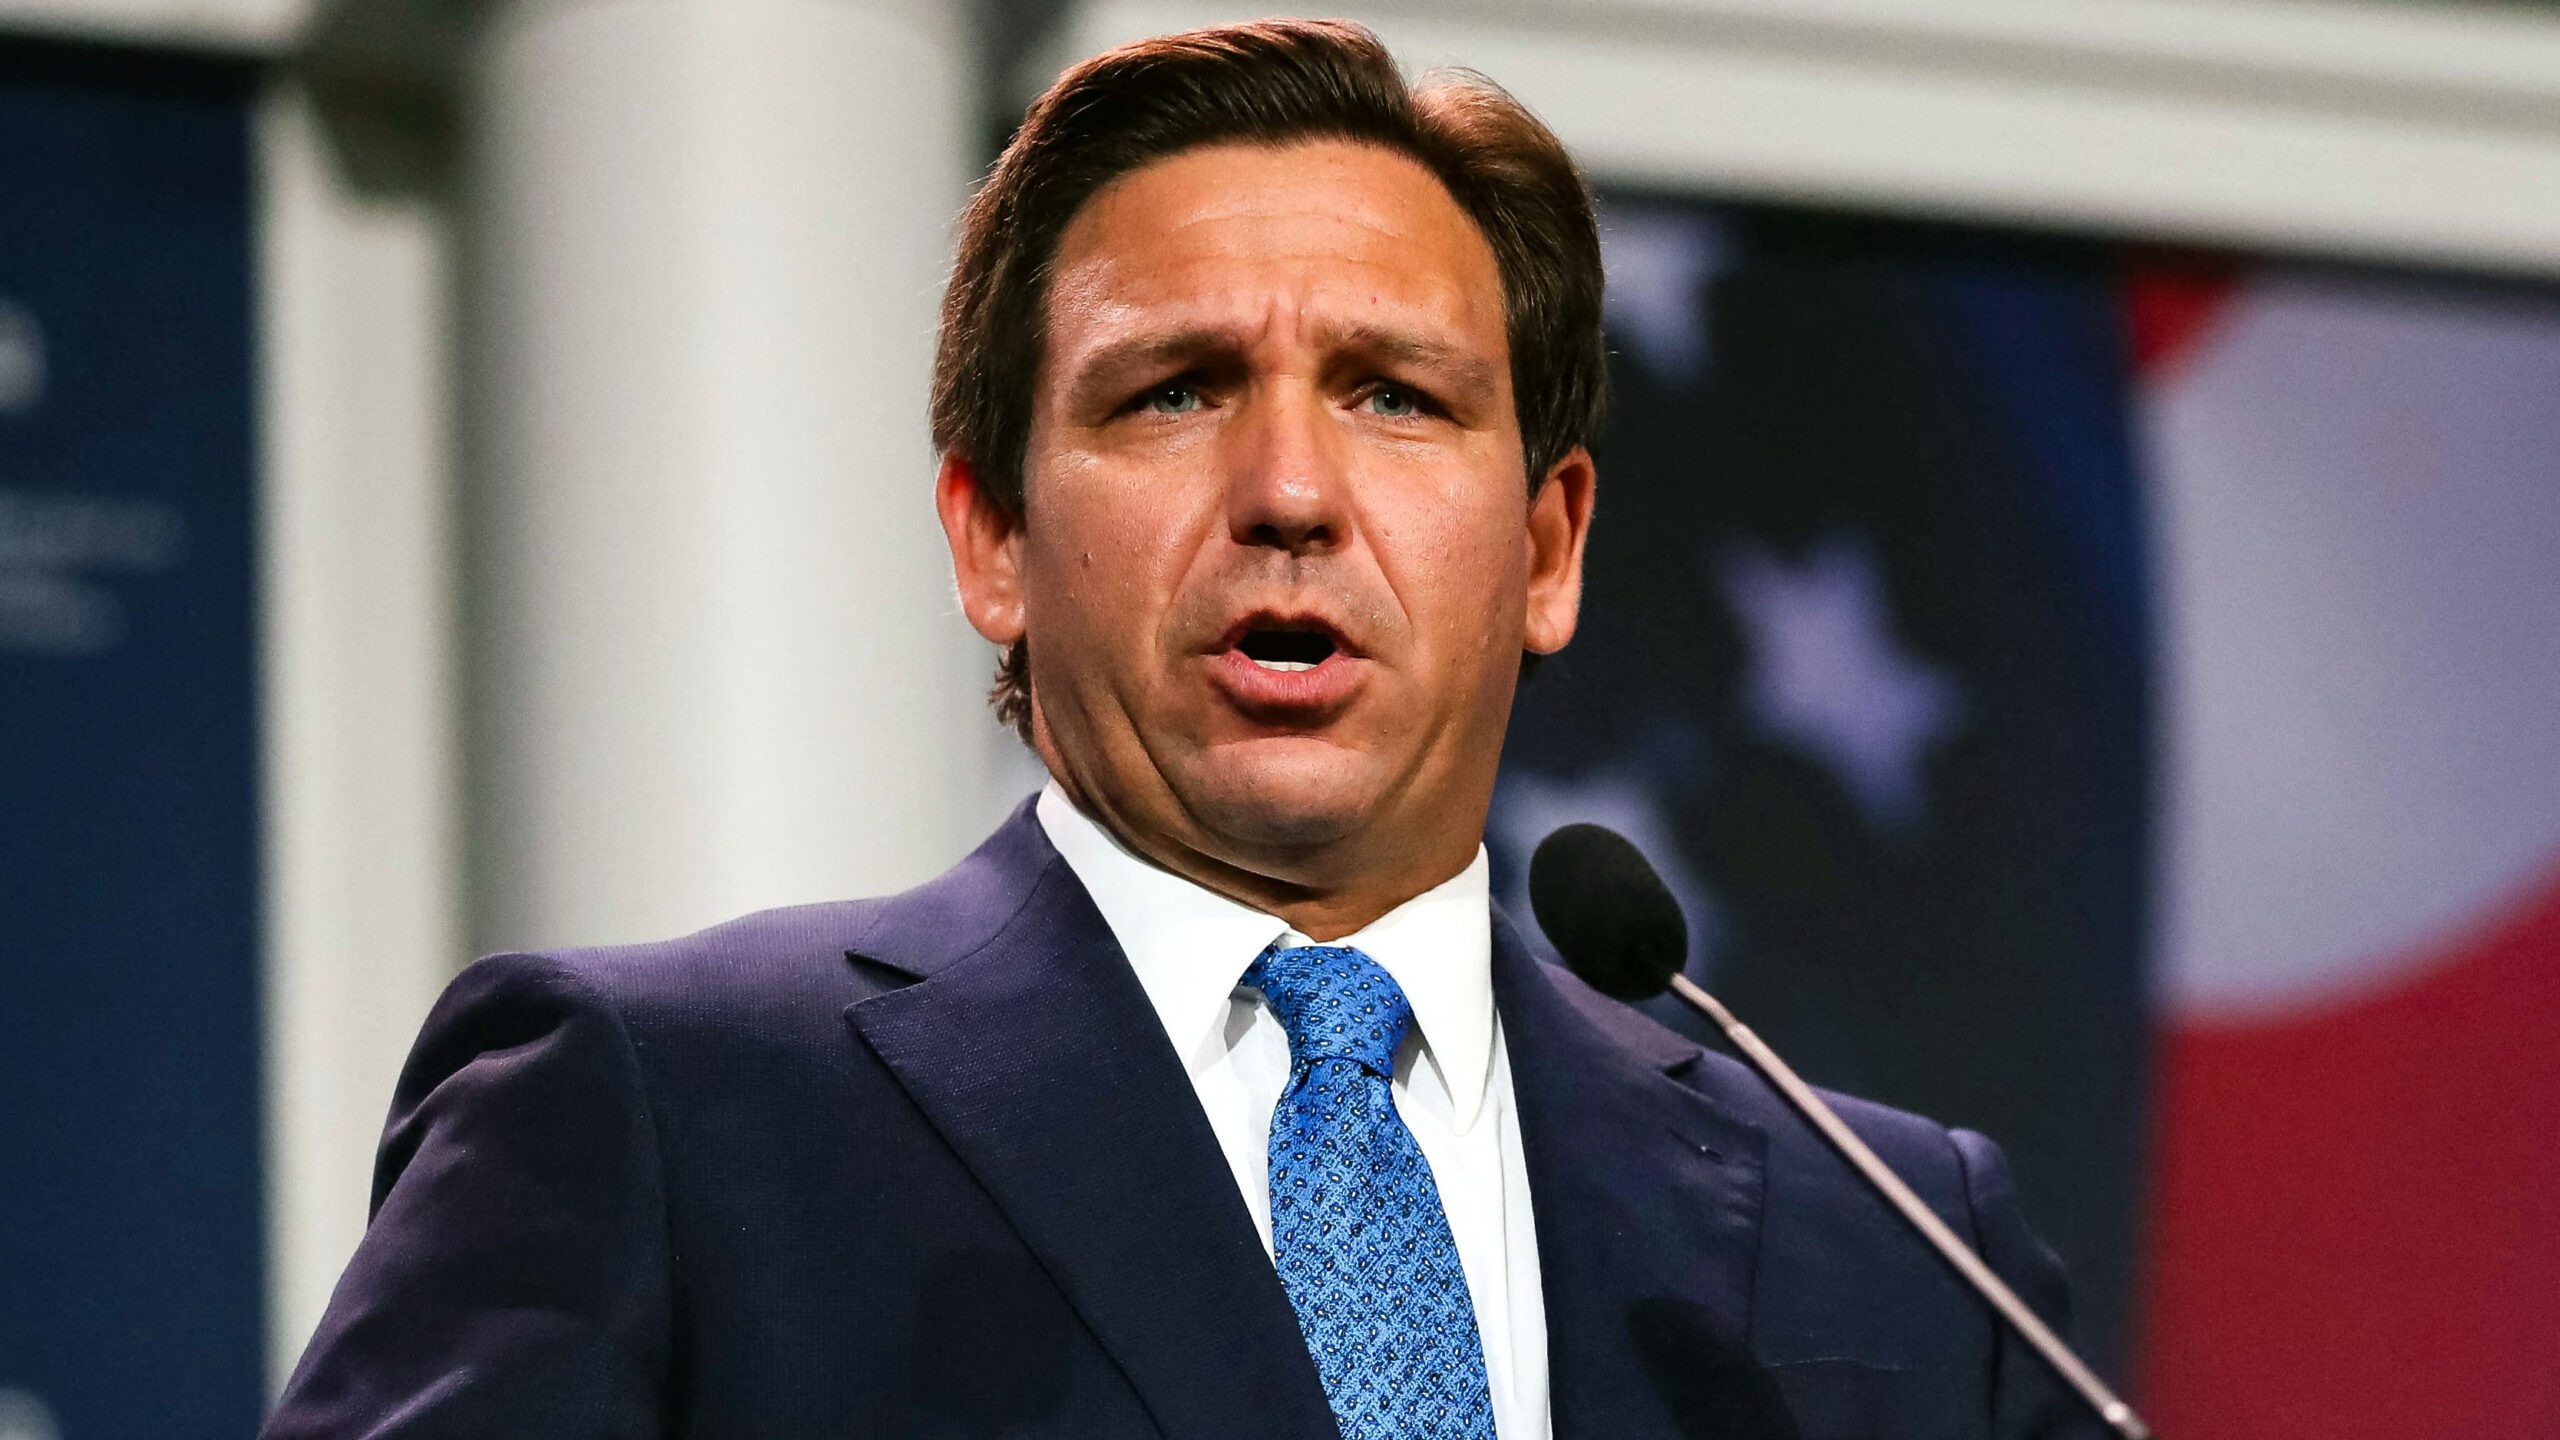 desantis-holds-massive-lead-over-trump-in-2024-matchup,-poll-shows